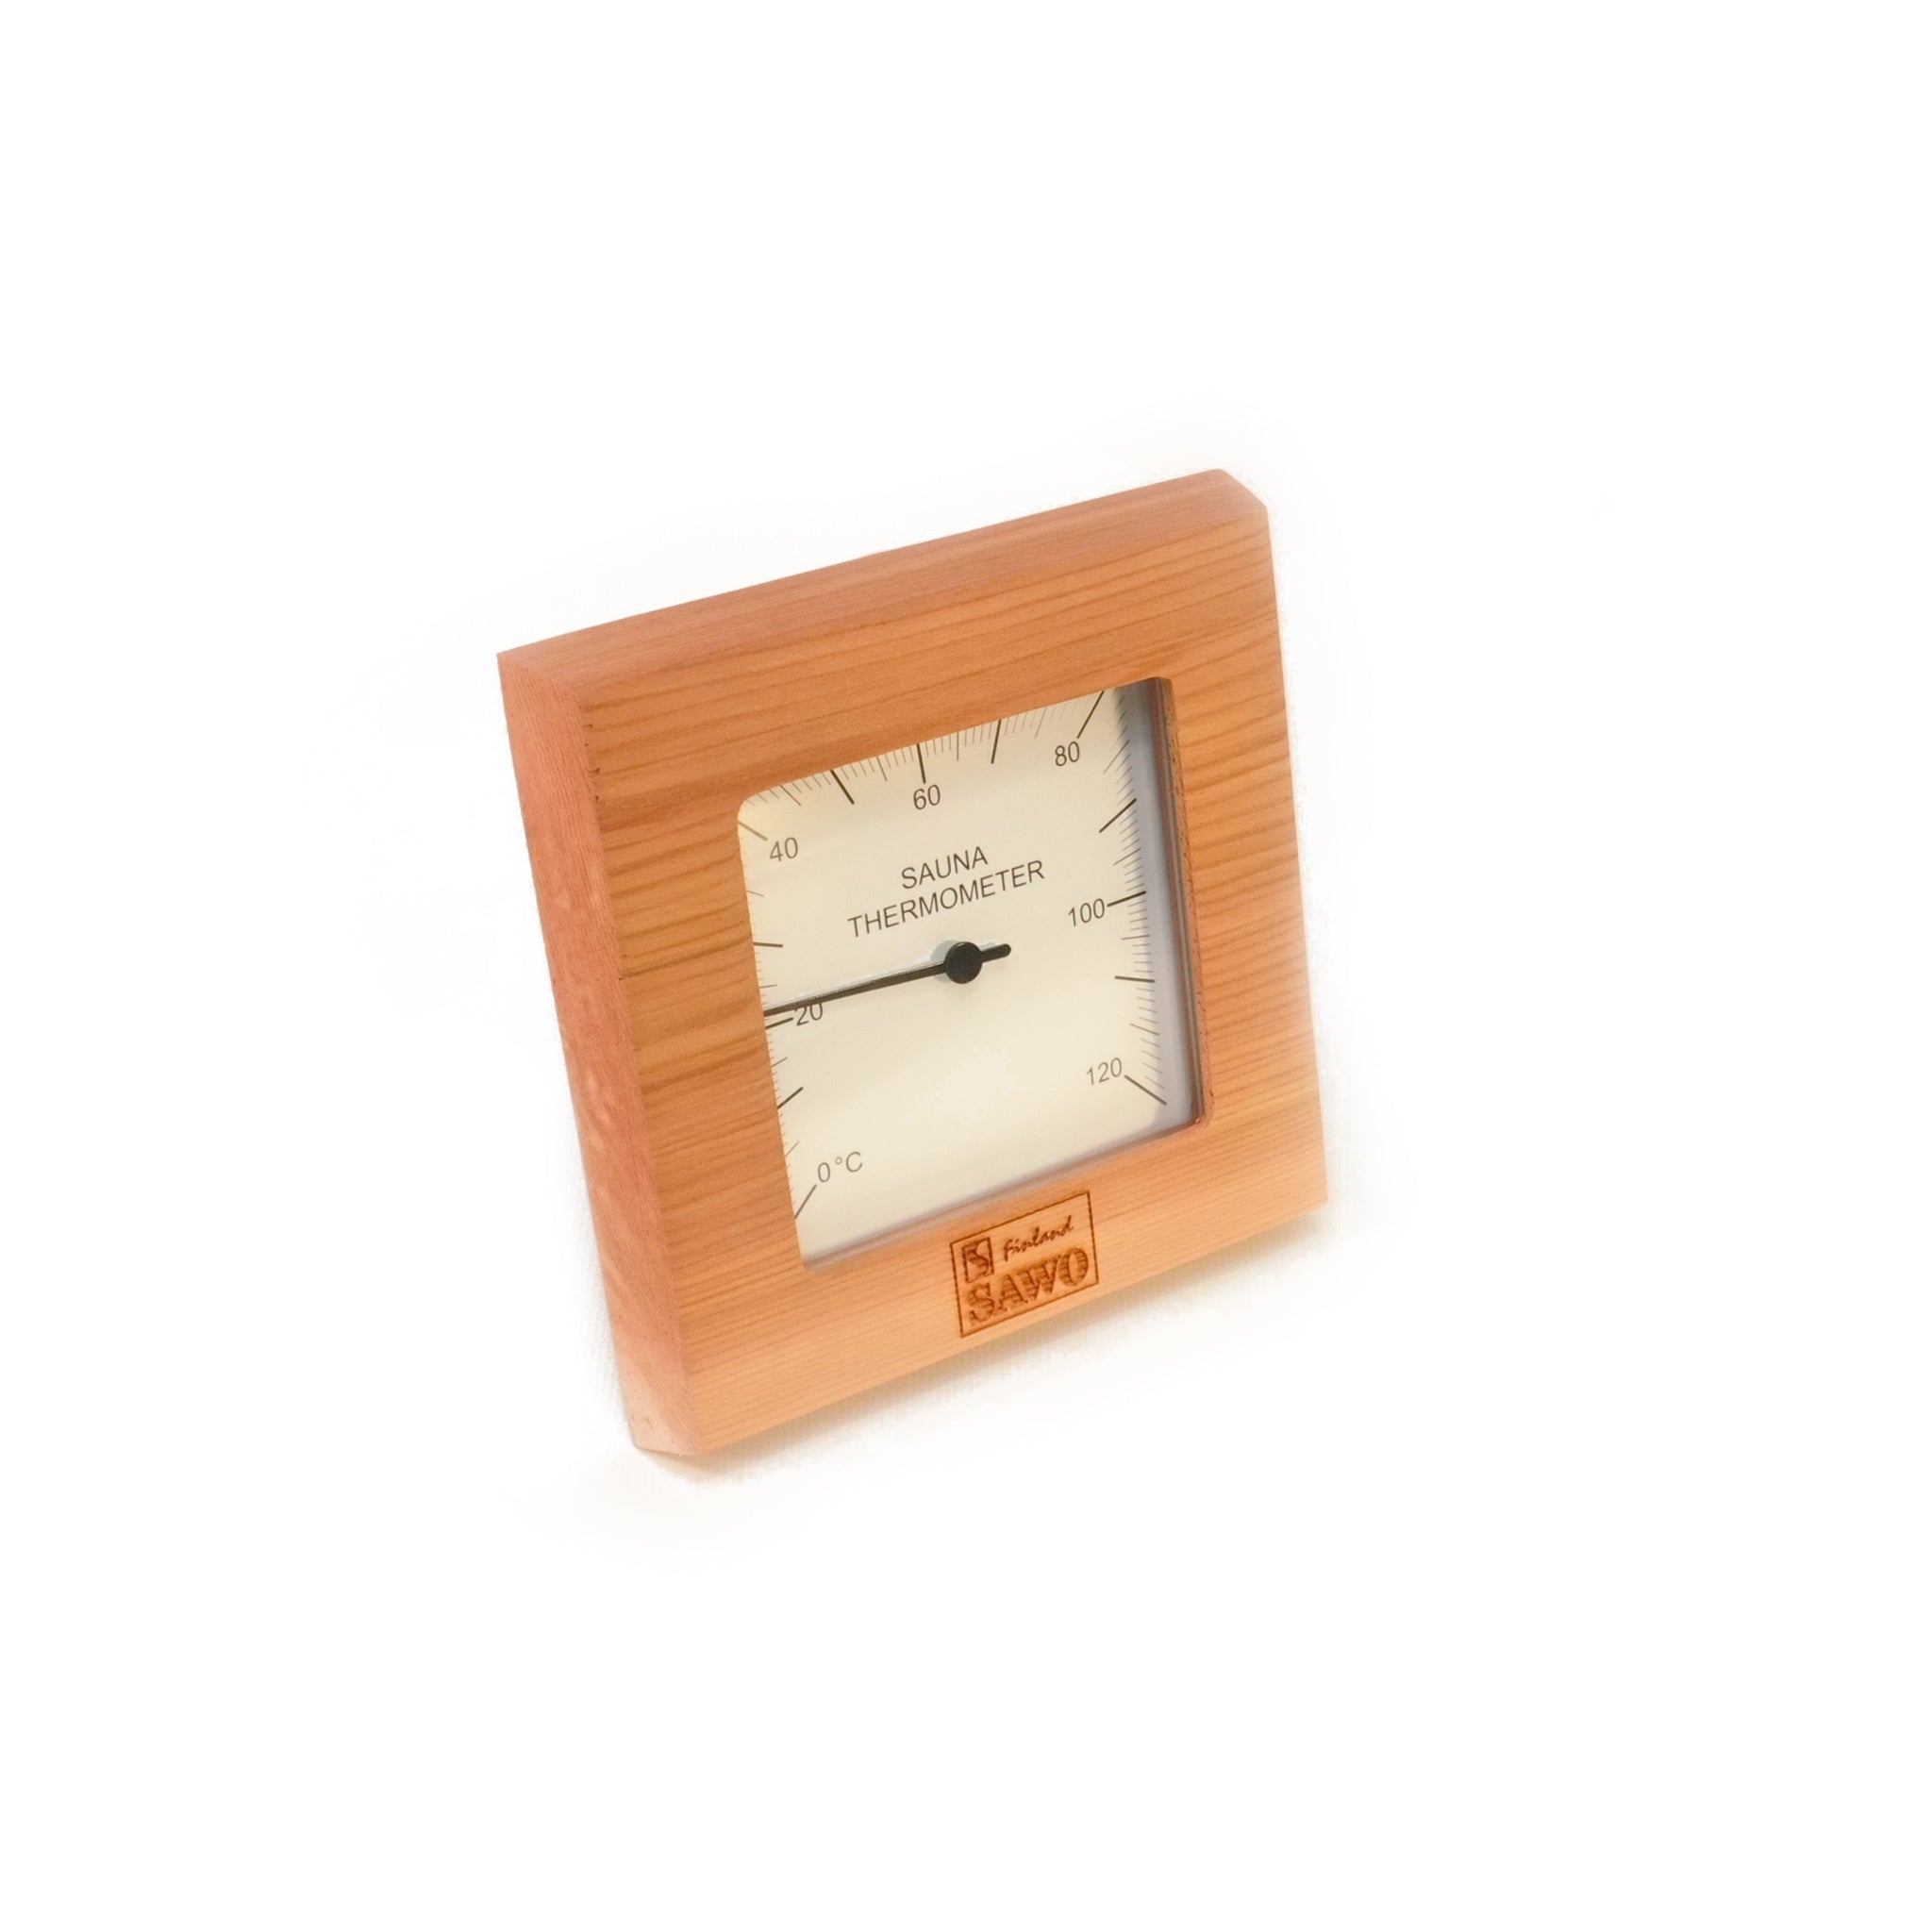 Cedar sauna thermometer with plastic dial cover on white background